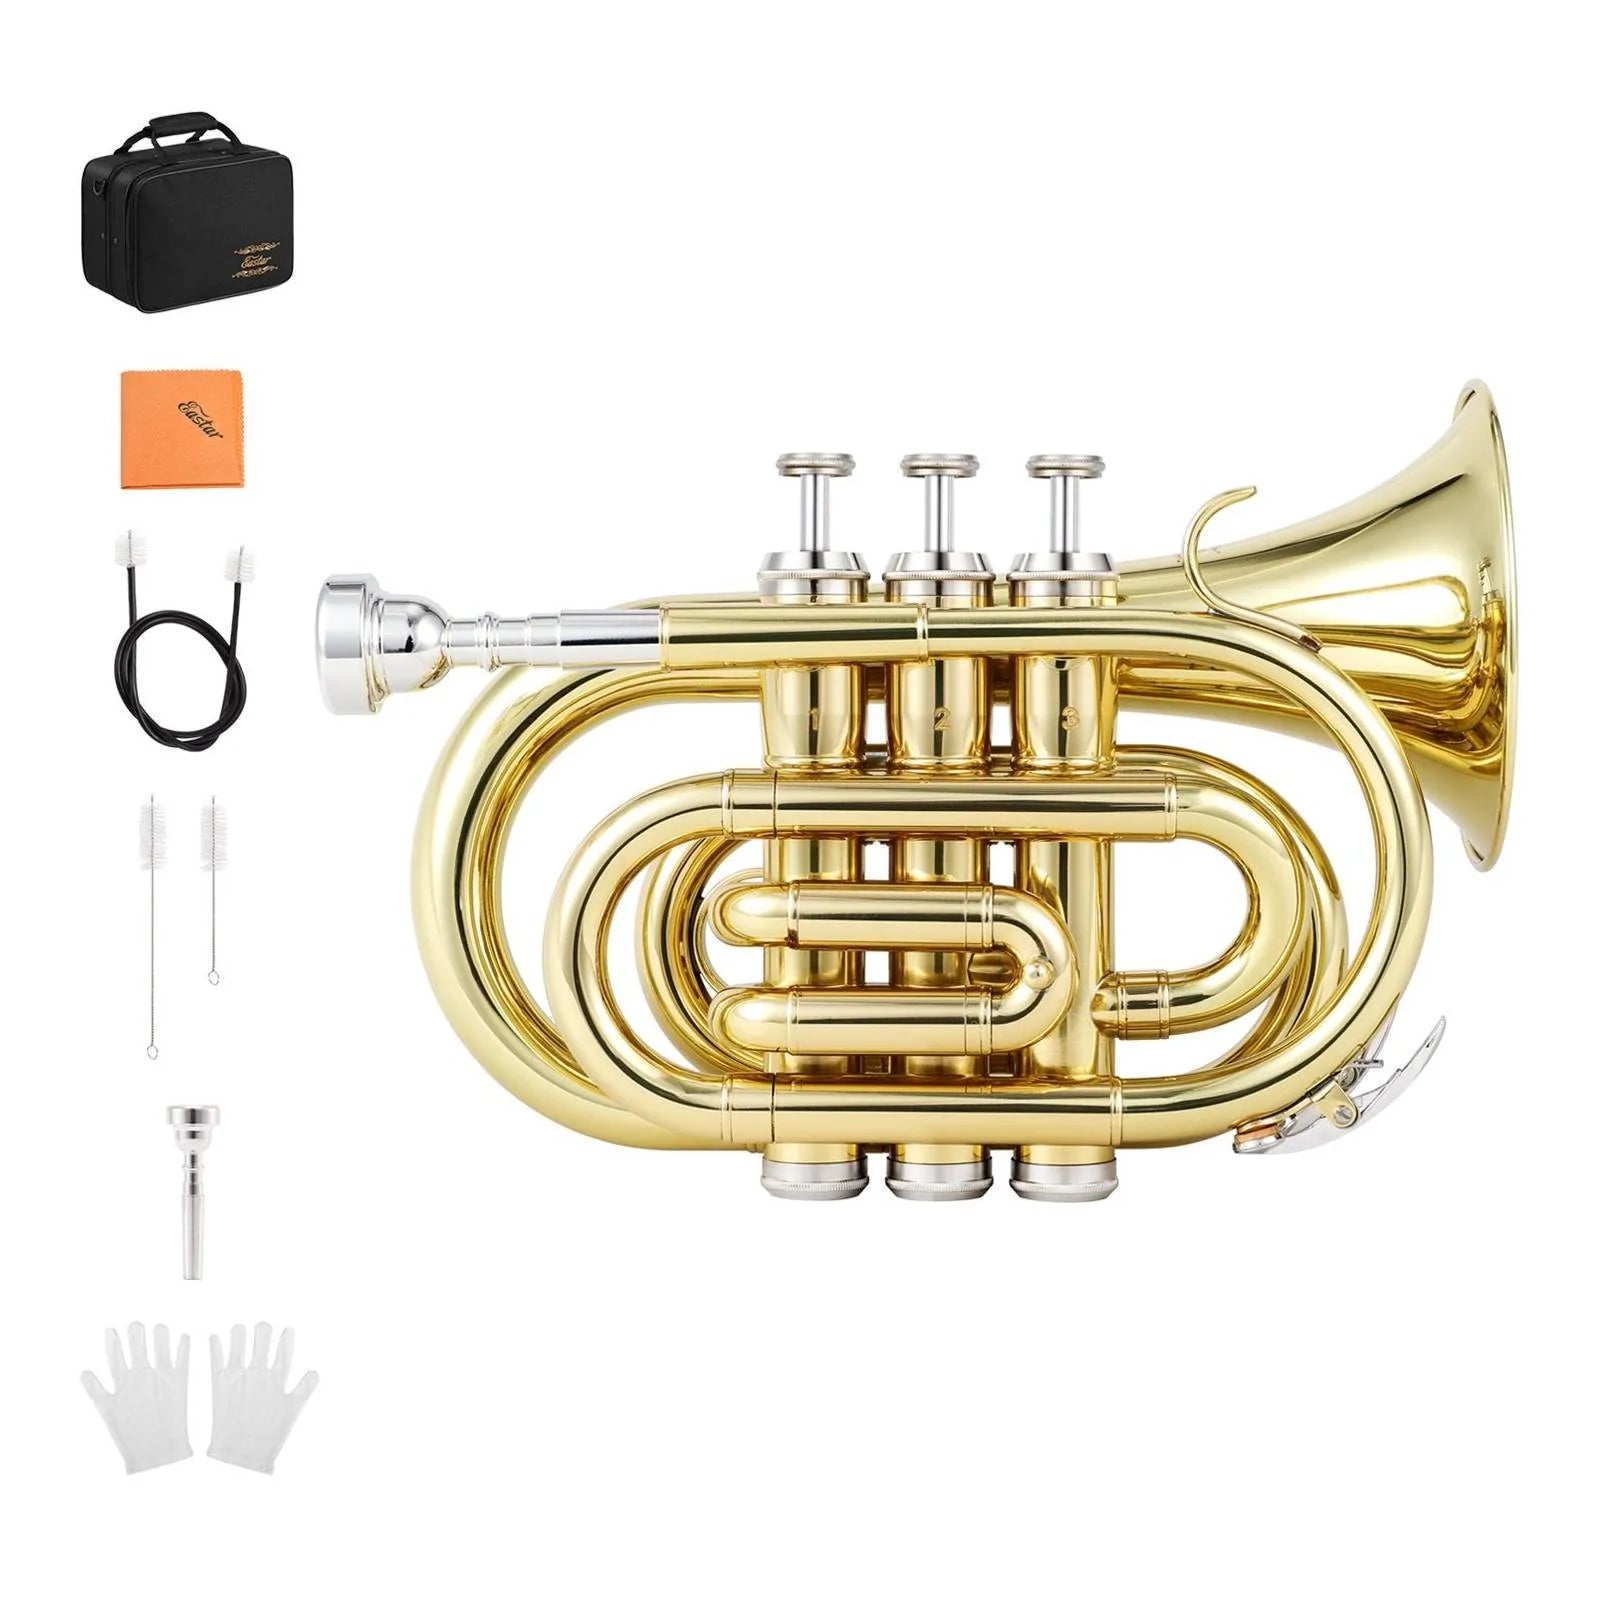 

Eastar ETR-330 Bb B-Flat Pocket Trumpet with Valve Oil/Mouthpiece 7C/Cleaning kit/Hard Case/Gloves/Gold Lacquer